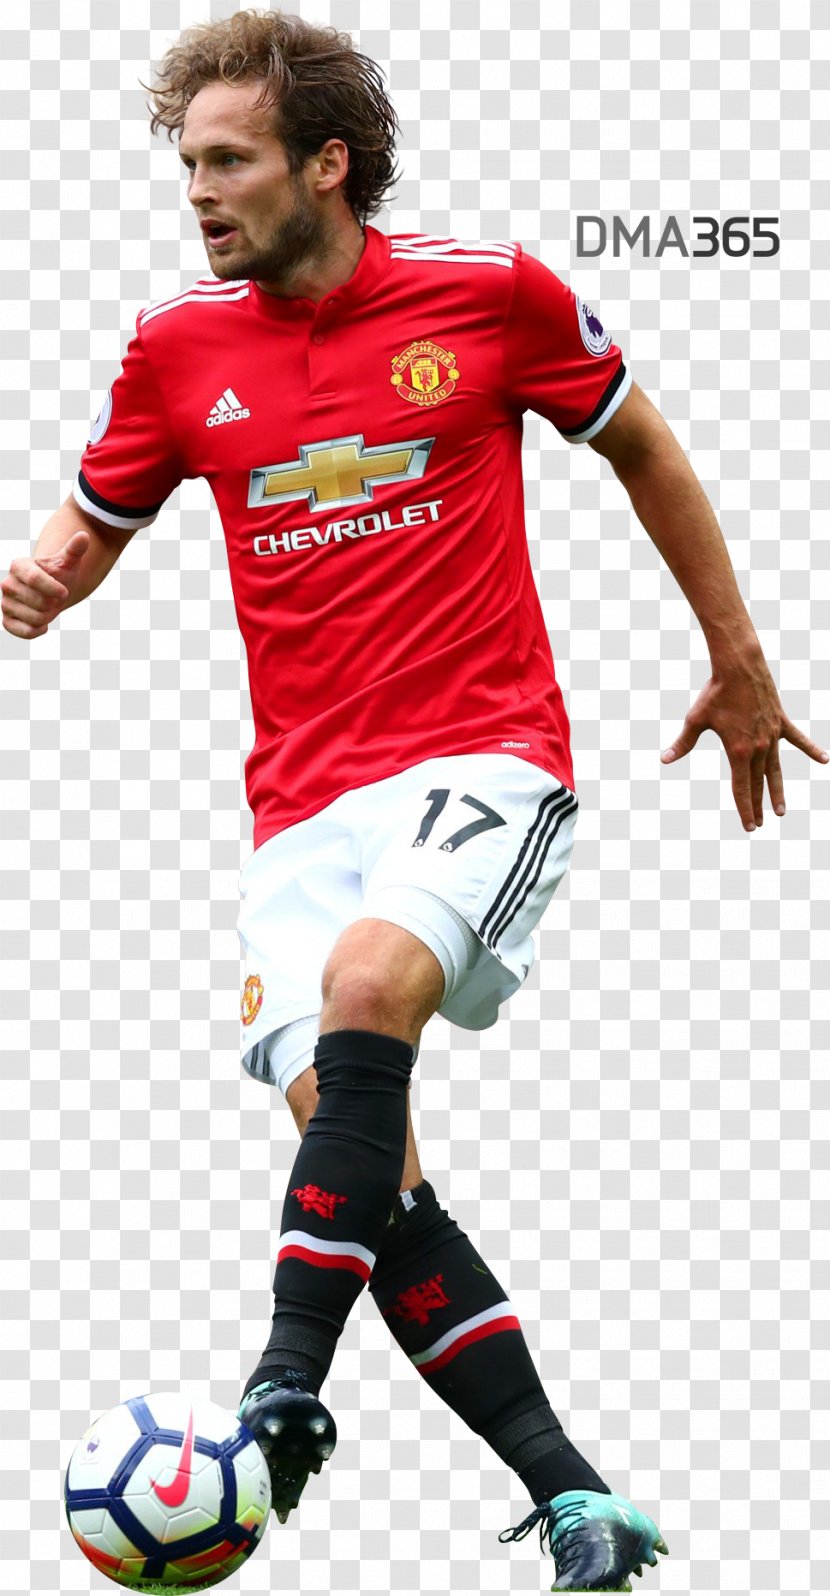 Daley Blind Jersey Soccer Player Football Sport - Sports Equipment Transparent PNG